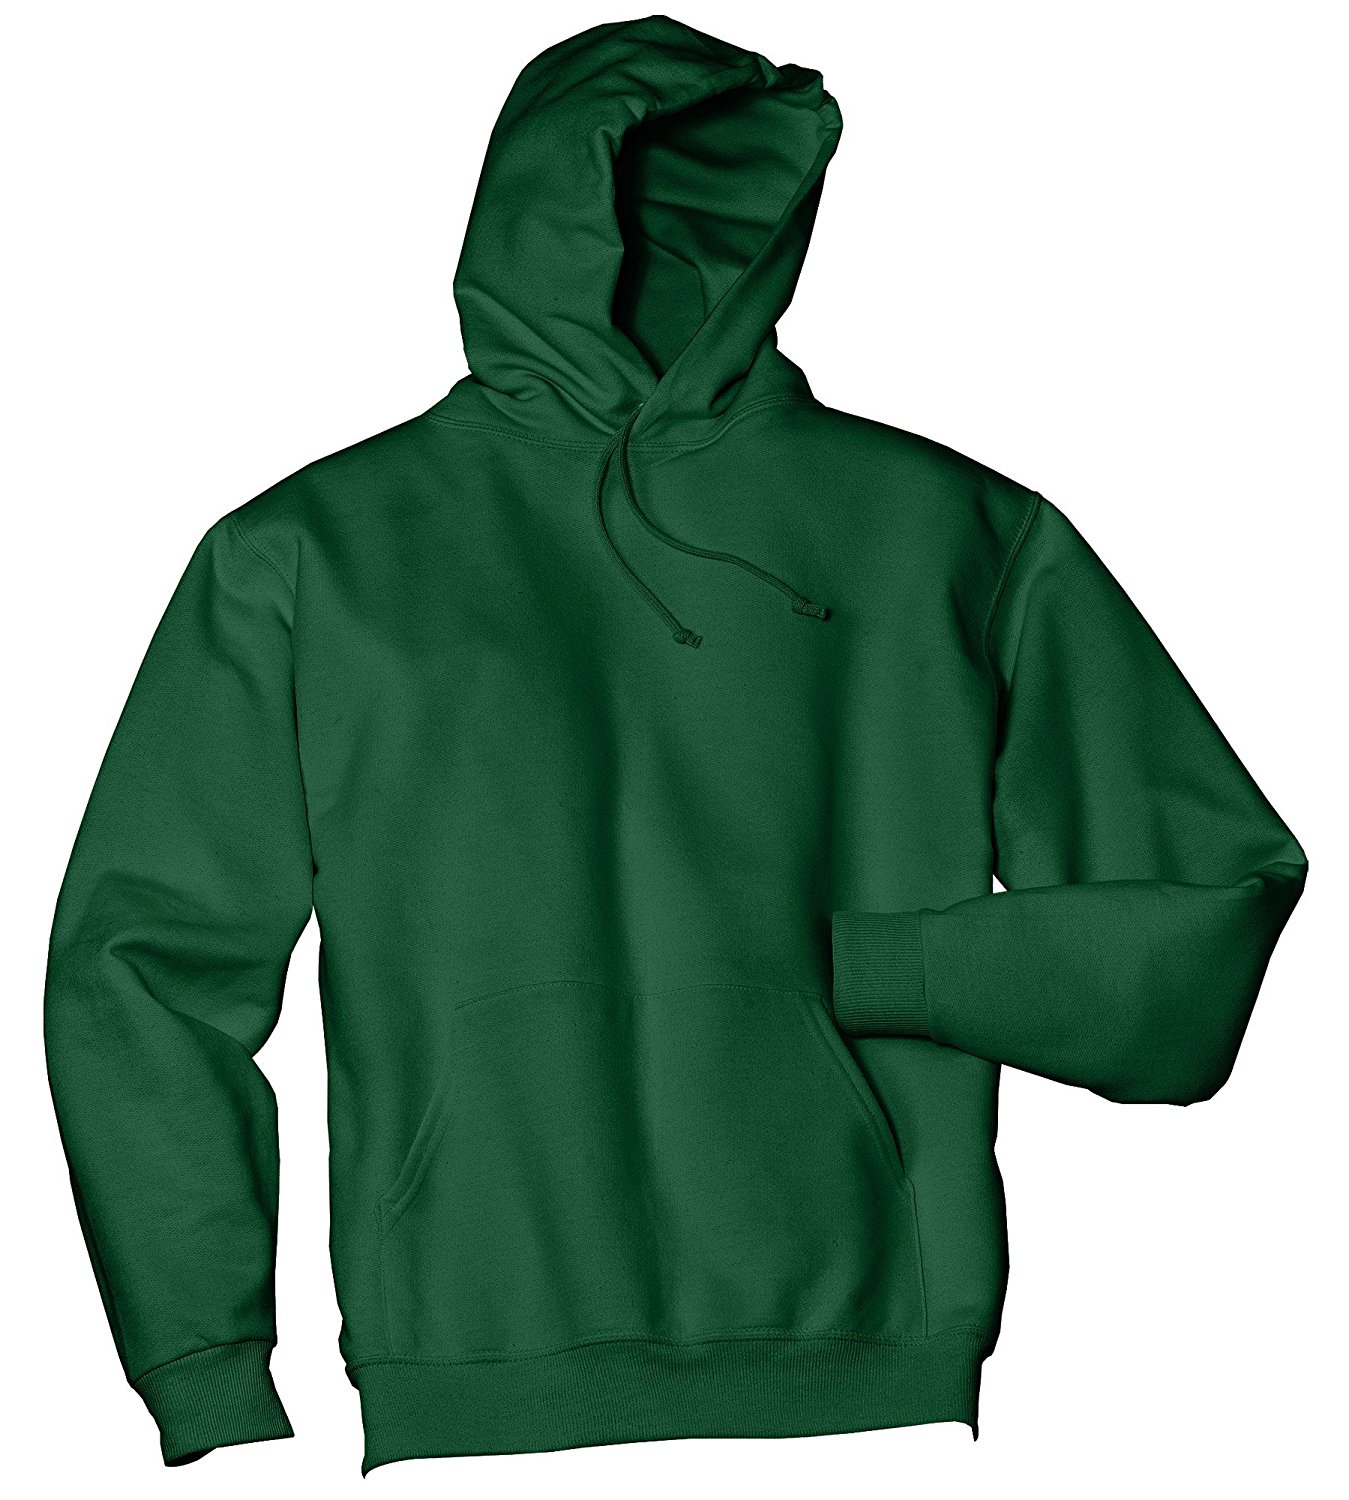 Jerzees Adult Double-Lined Hooded Pullover, Forest Green, XX-Large